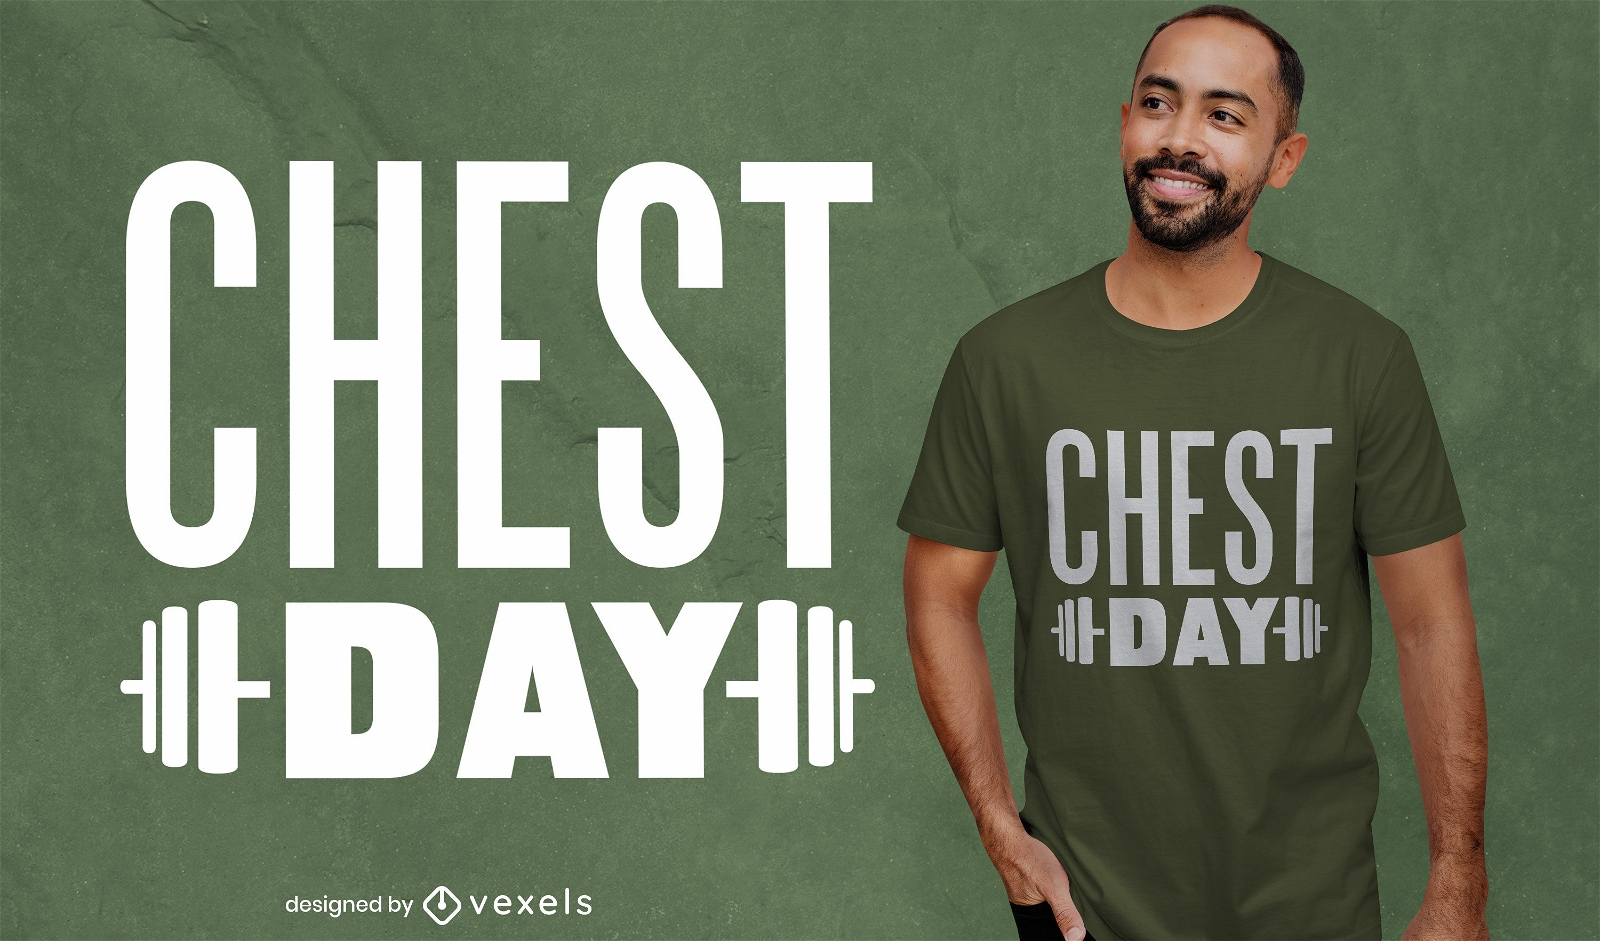 Chest day weightlifting quote t-shirt design